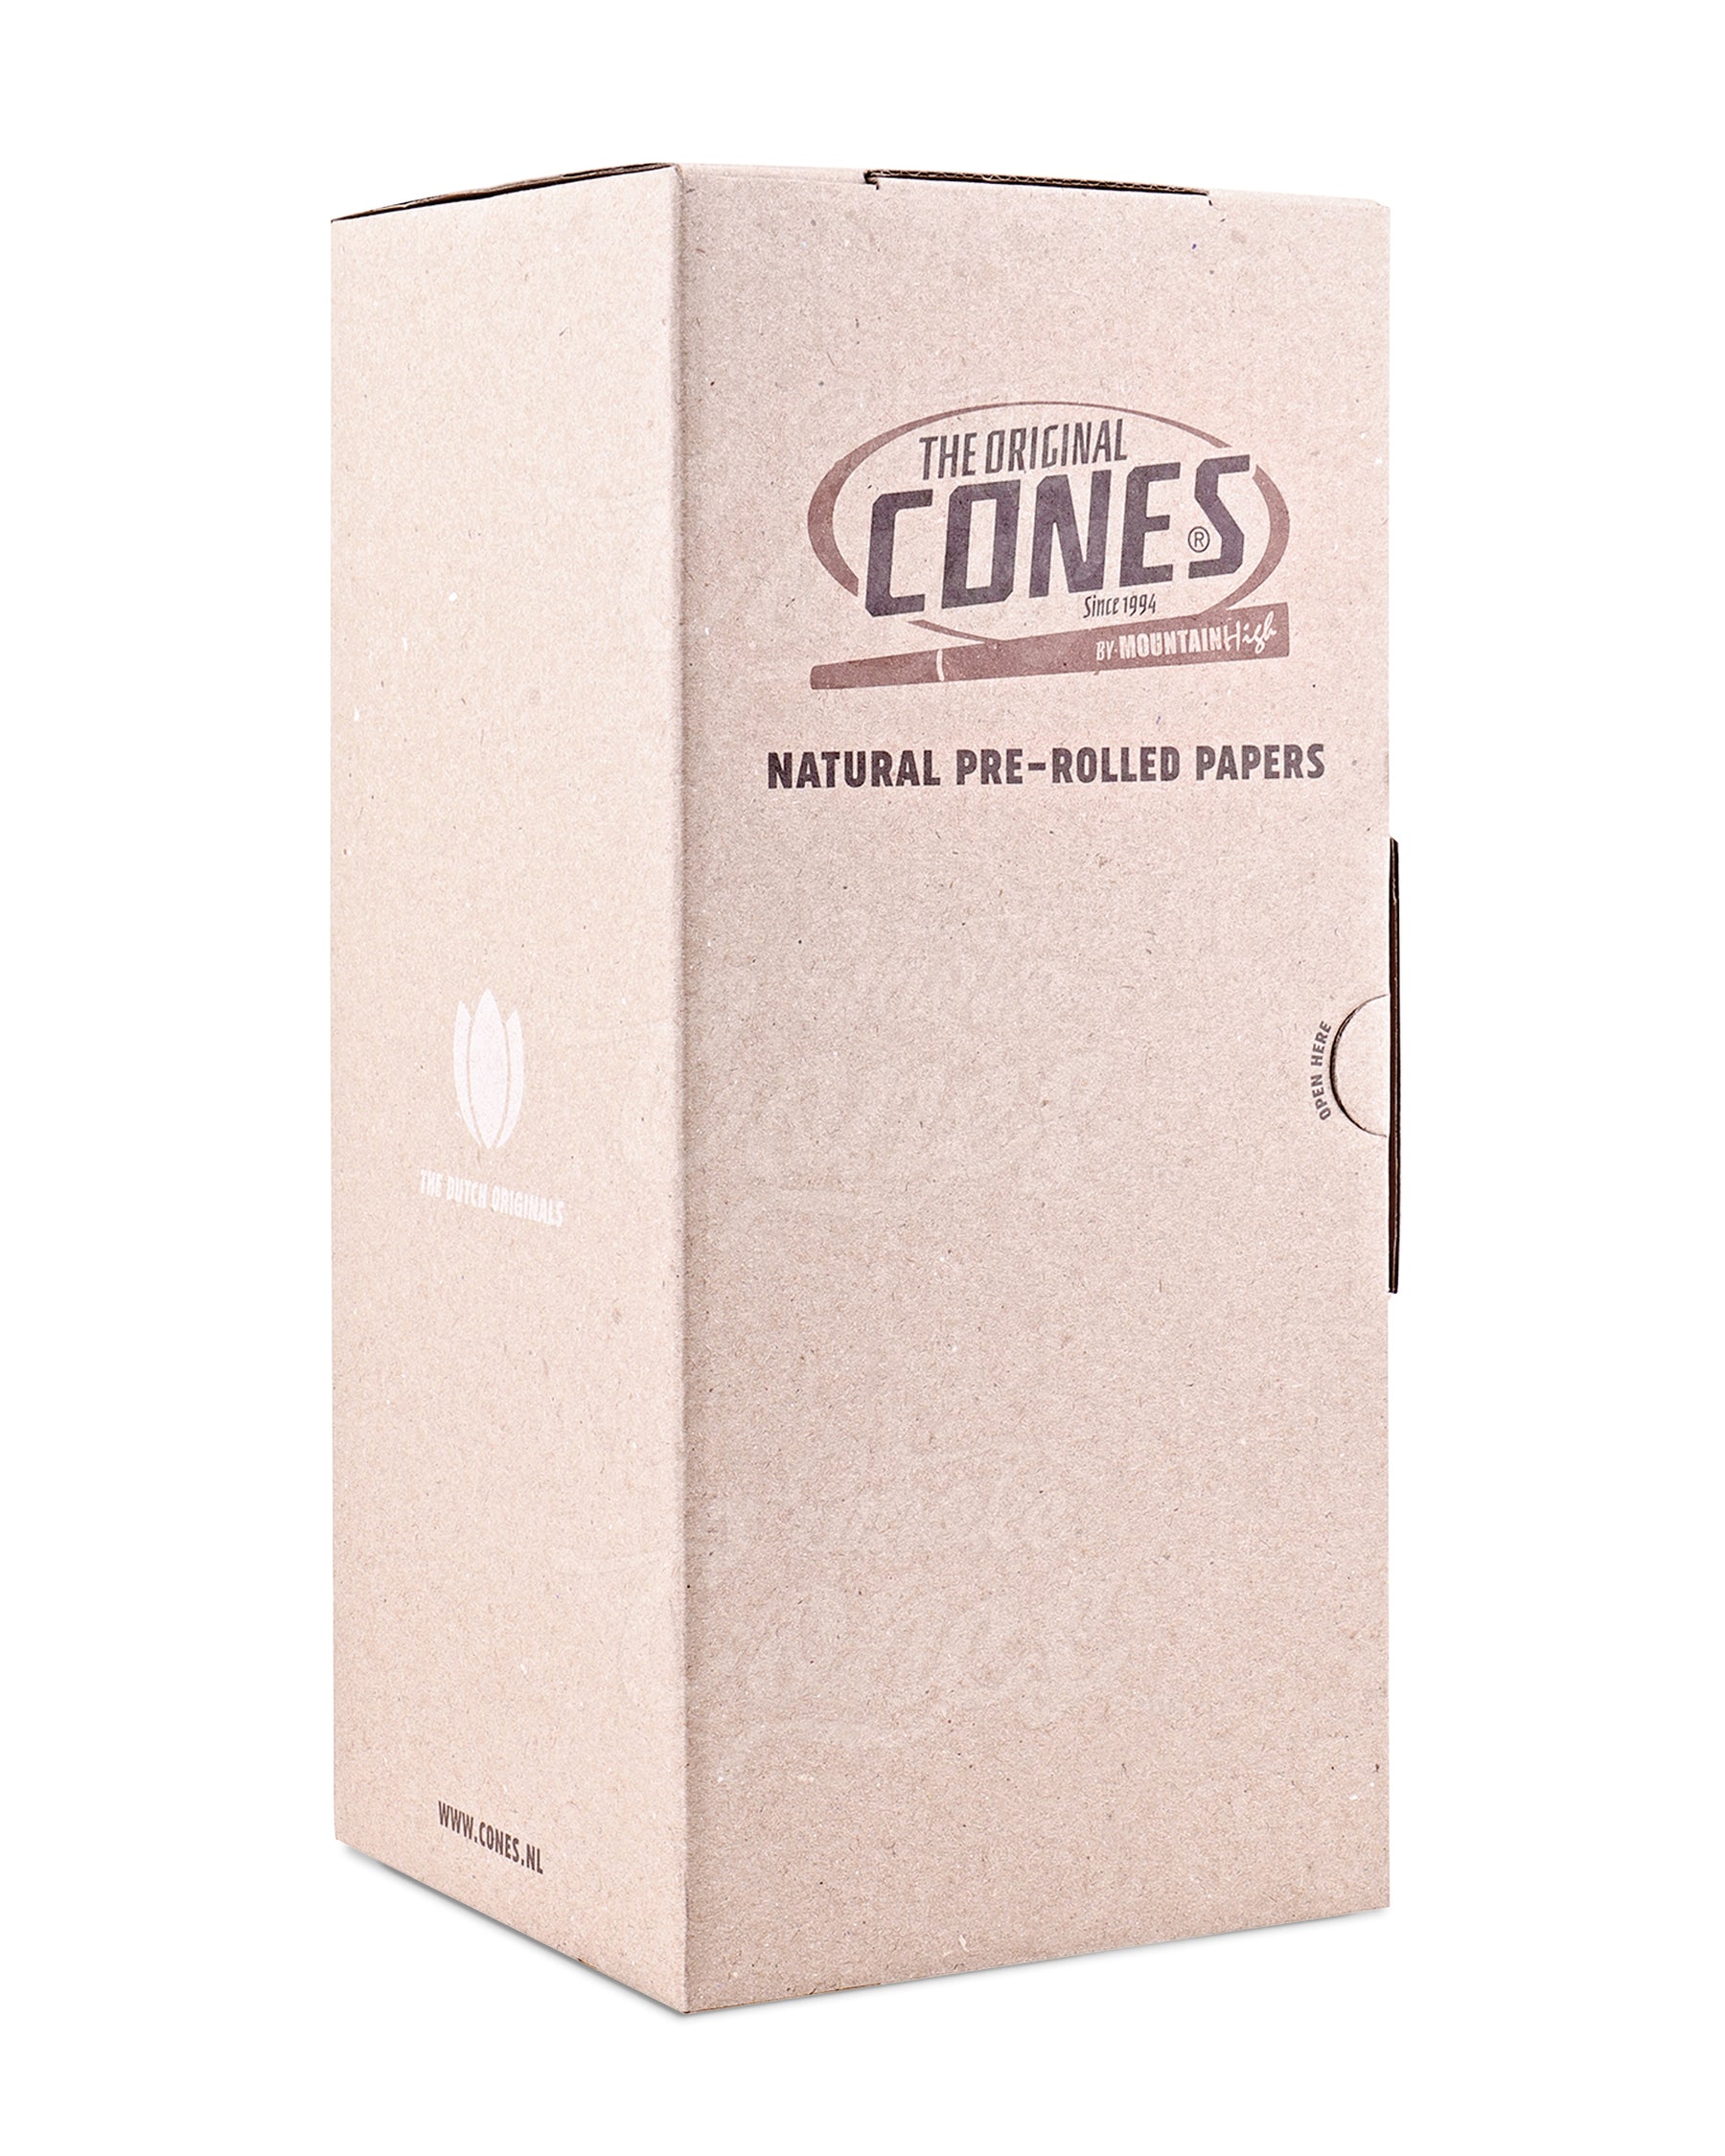 The Original Cones 109mm King Slim Size Unbleached Brown Paper Pre Rolled Cones w/ Filter Tip 1000/Box